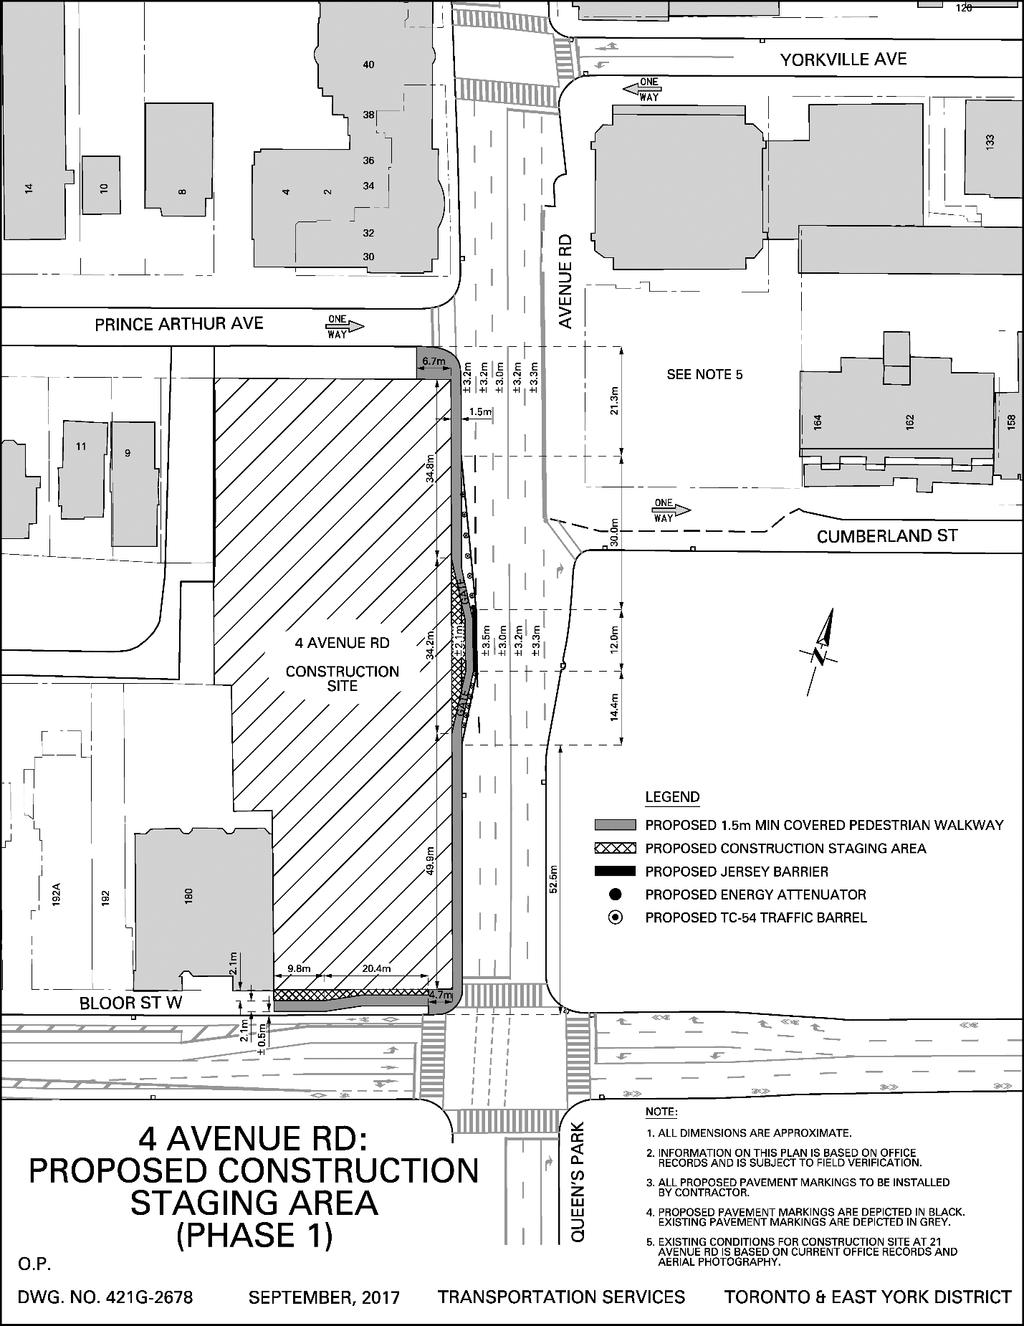 Construction Staging Area (Phase 1) - 4 Avenue Road